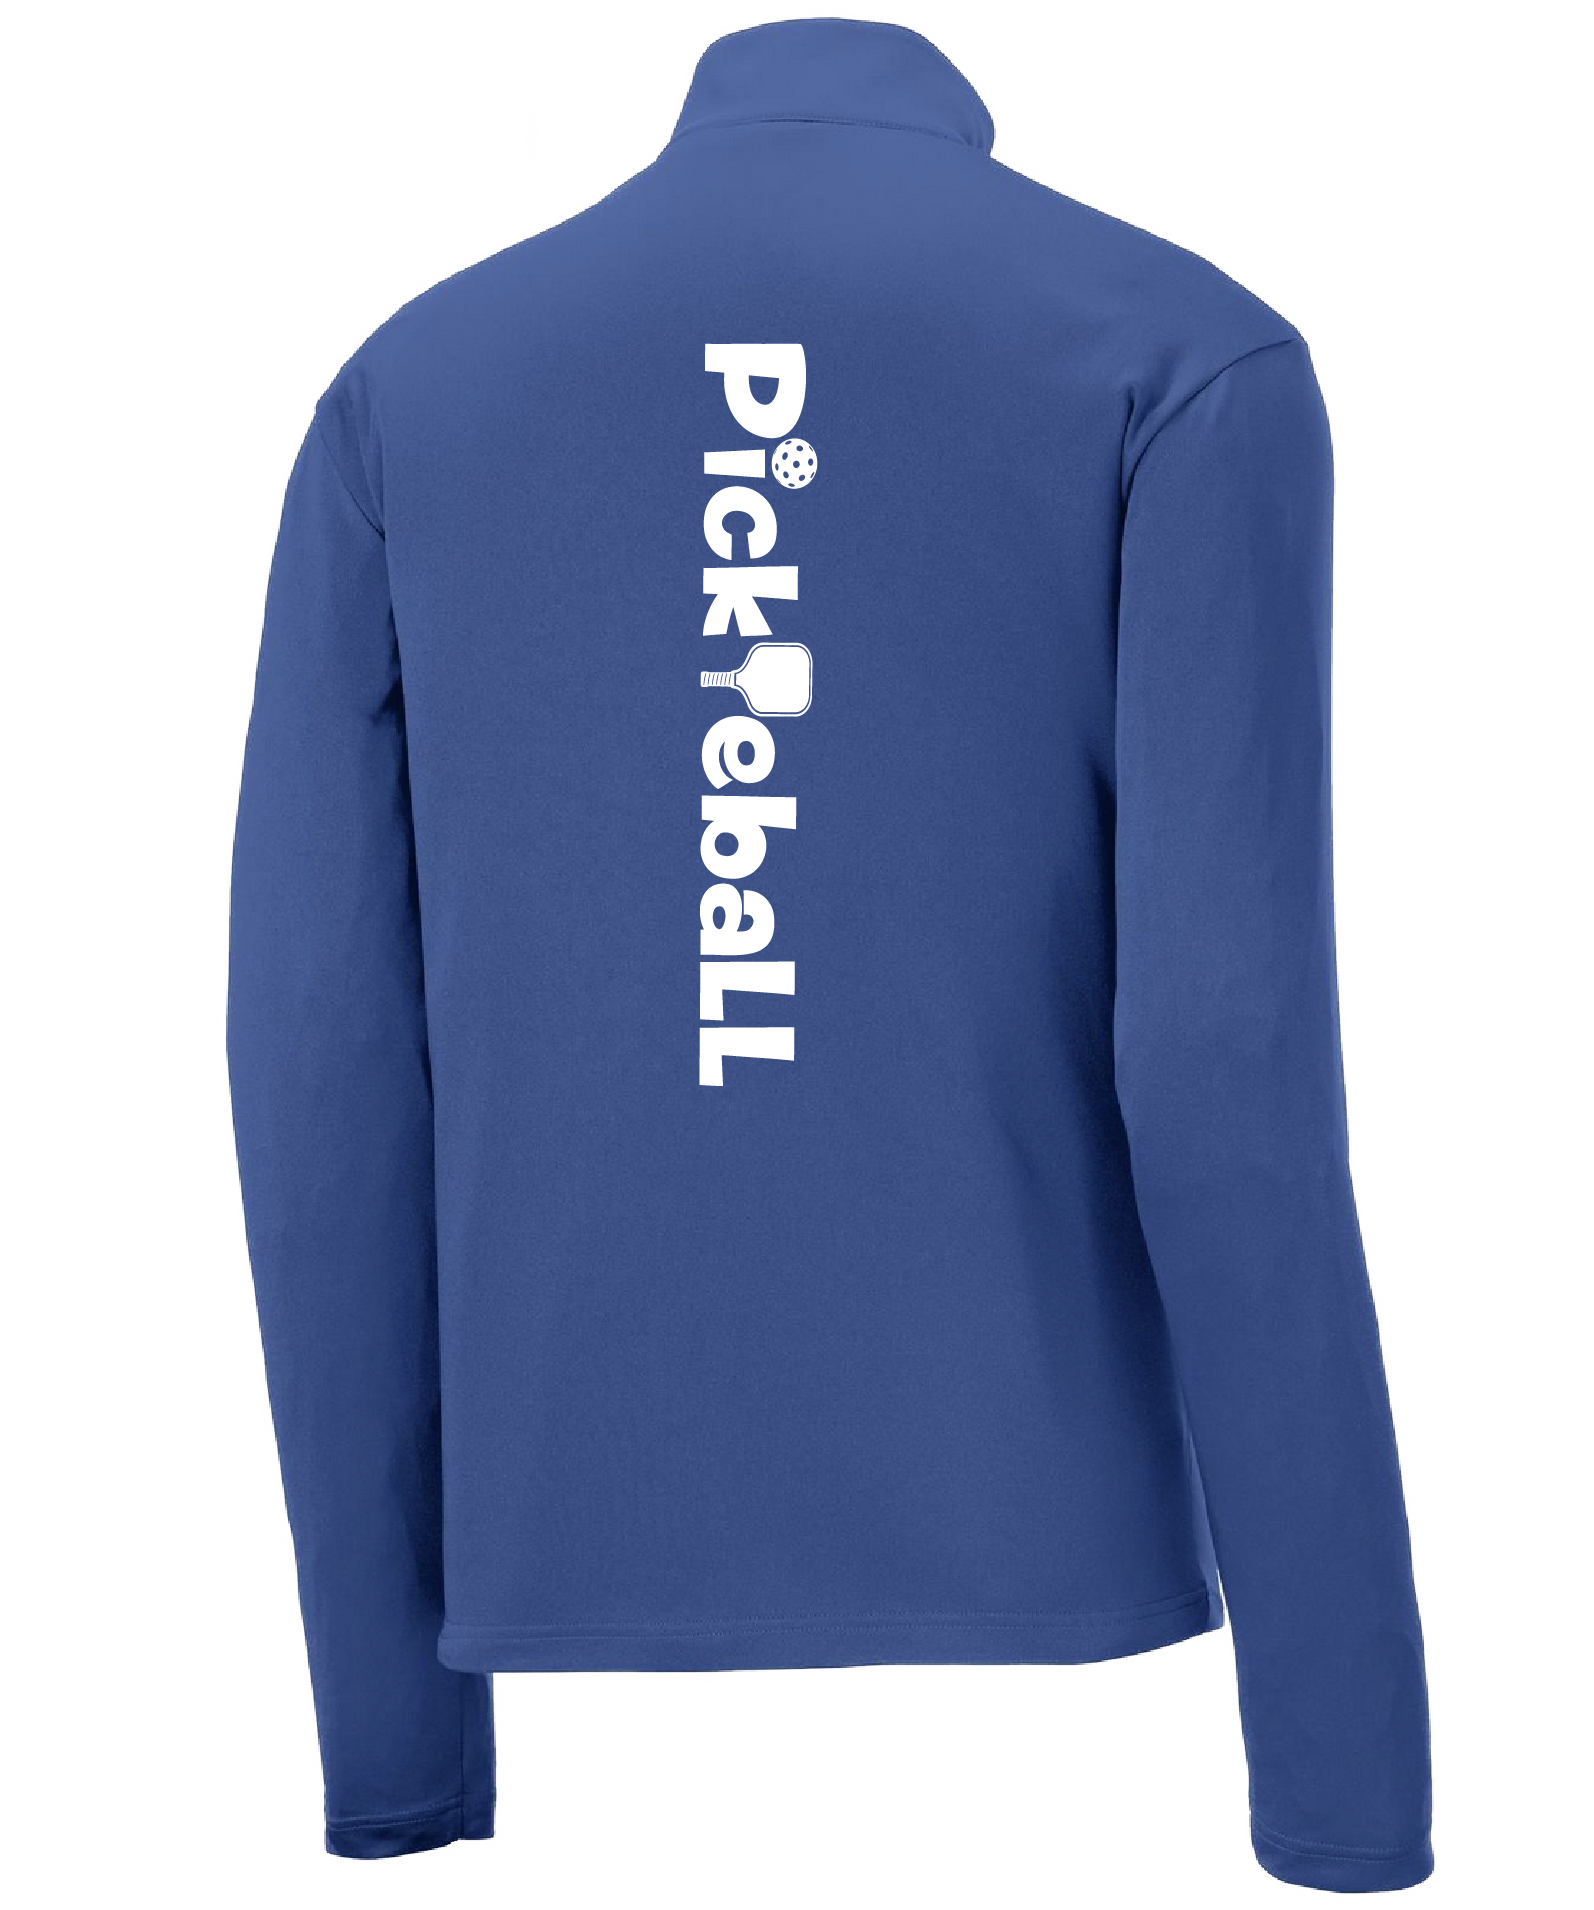 Pickleball Design: Pickleball Horizontal Customizable Location  Men's 1/4-Zip Pullover  Turn up the volume in this Men's shirt with its perfect mix of softness and attitude. Material is ultra-comfortable with moisture wicking properties and tri-blend softness. PosiCharge technology locks in color. Highly breathable and lightweight. Versatile enough for wearing year-round.